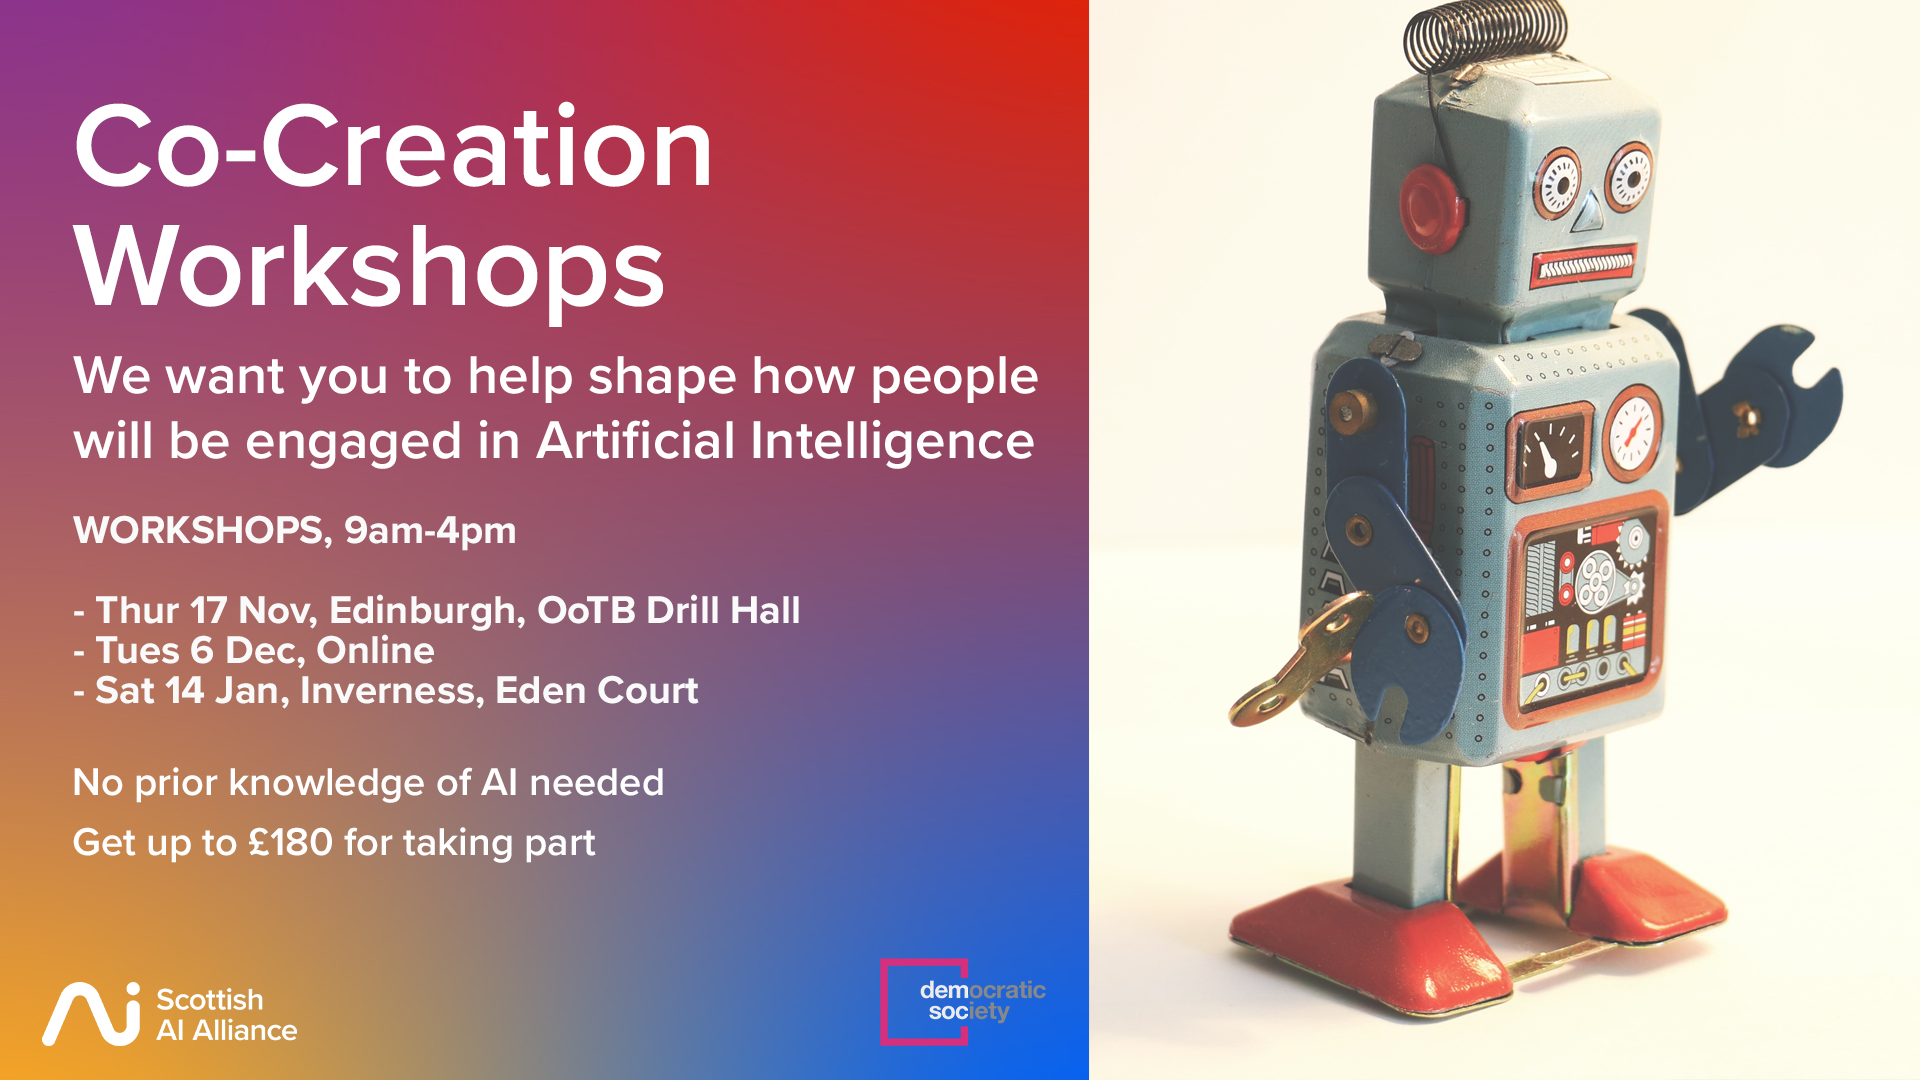 Co-creation workshops poster with dates and information from this page